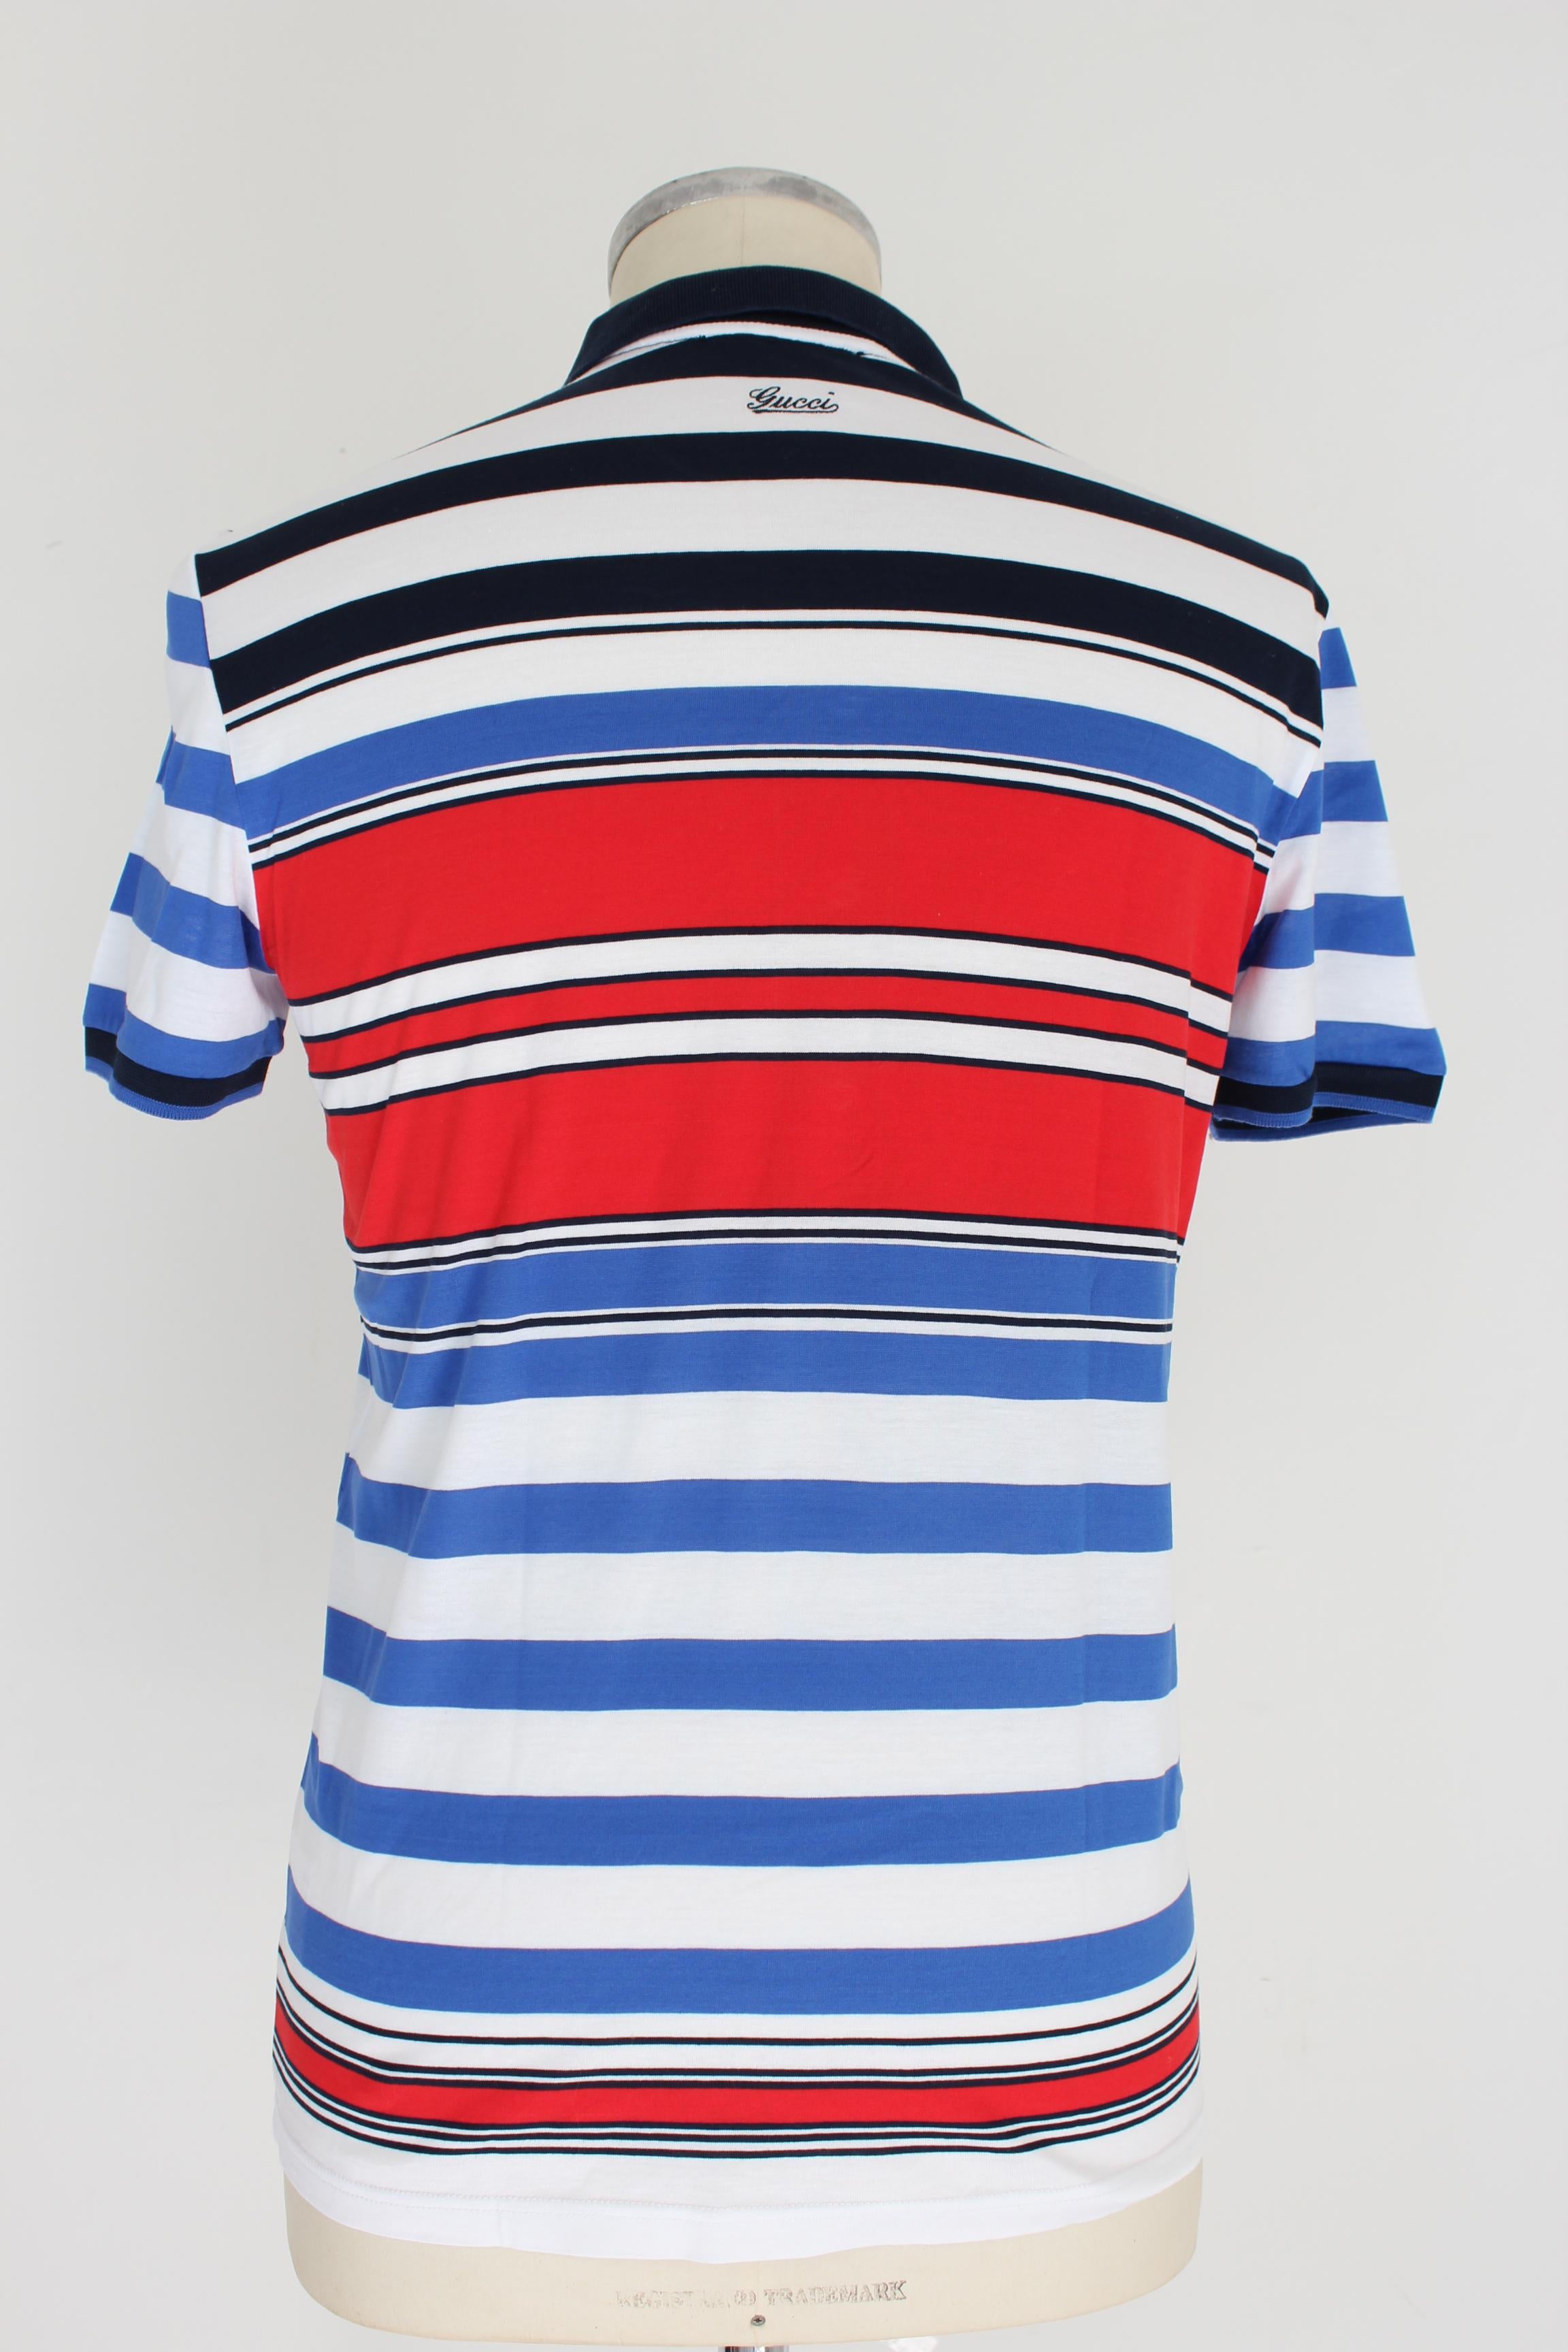 Gucci 2000s men's shirt. Short sleeved polo shirt, skinny model, striped. White, blue and red color, 100% cotton. Made in Italy. Excellent vintage condition.

Size: L / 48 It 38 Us 38 Uk

Shoulder: 48 cm
Bust / Chest: 50 cm
Sleeve: 18 cm
Length: 67